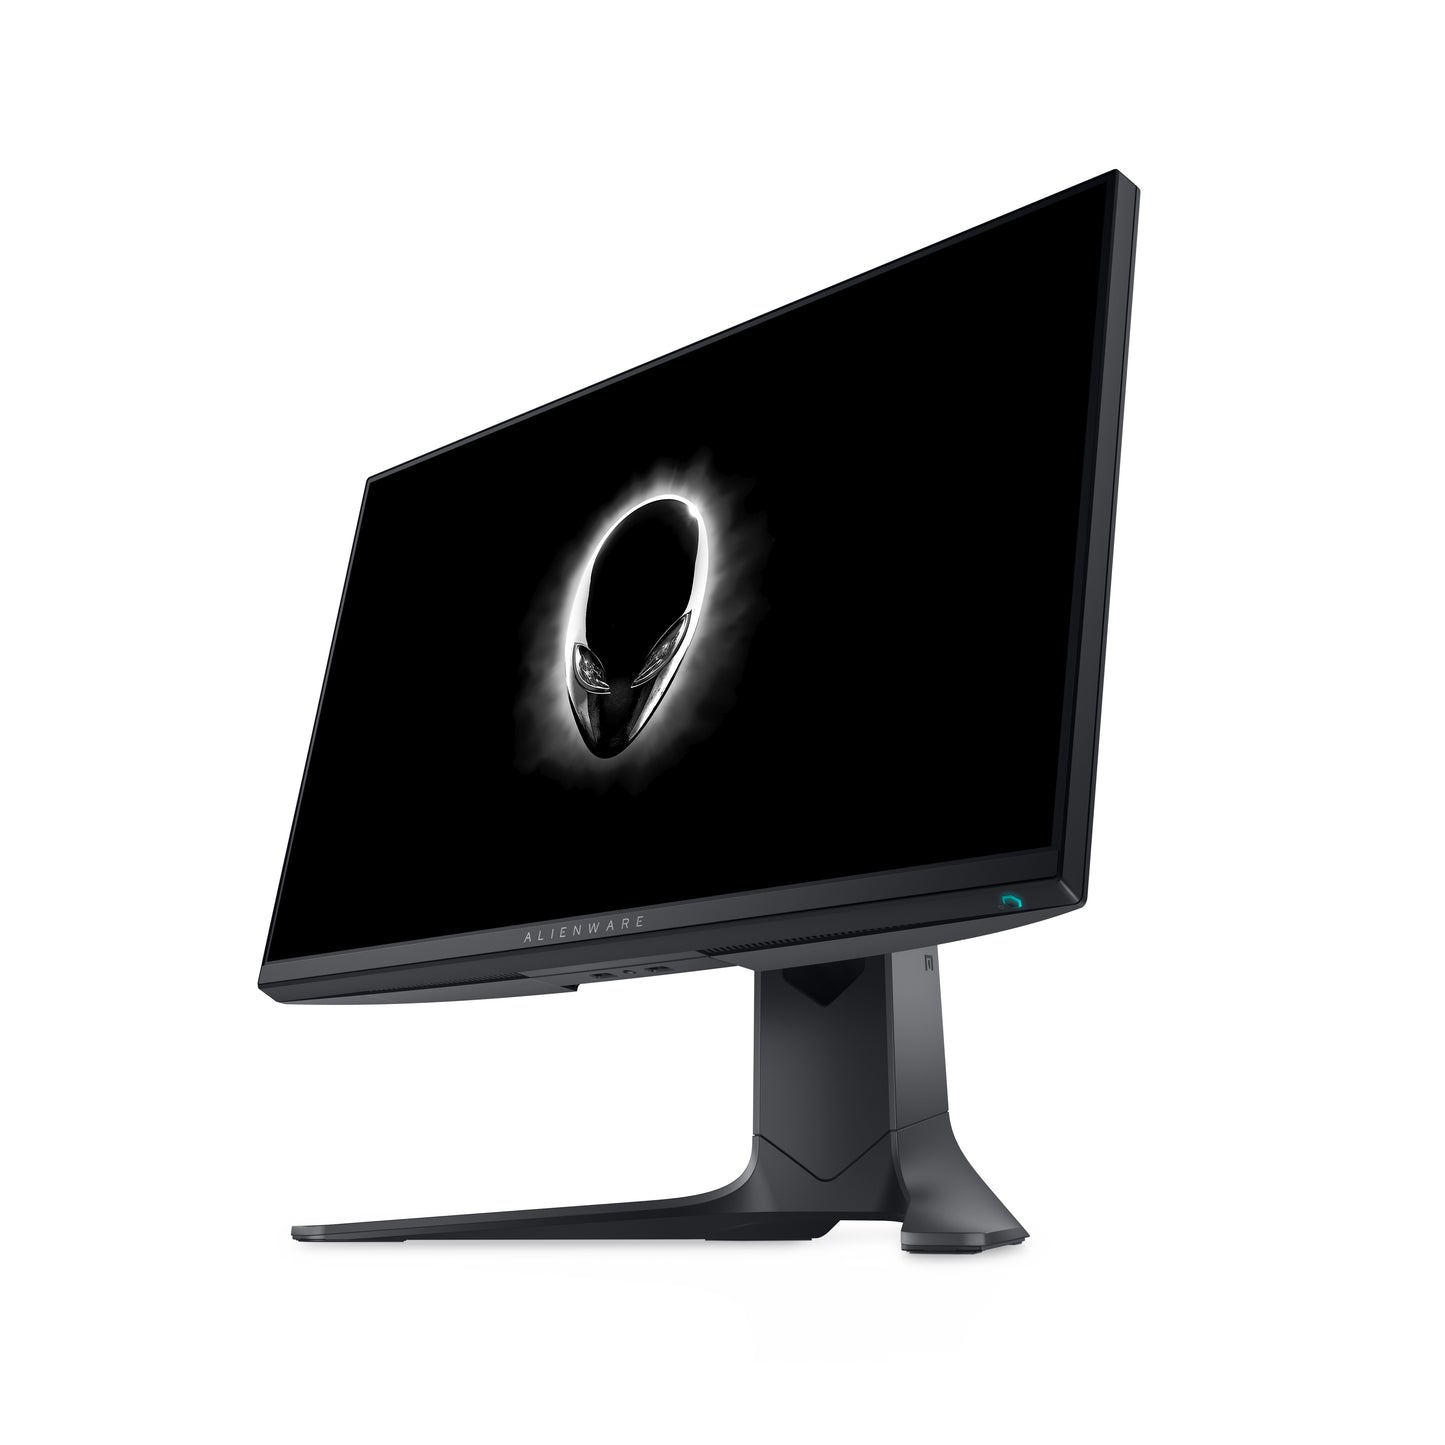 Dell Alienware AW2521HF - LED monitor - 62.2 cm (24.5")